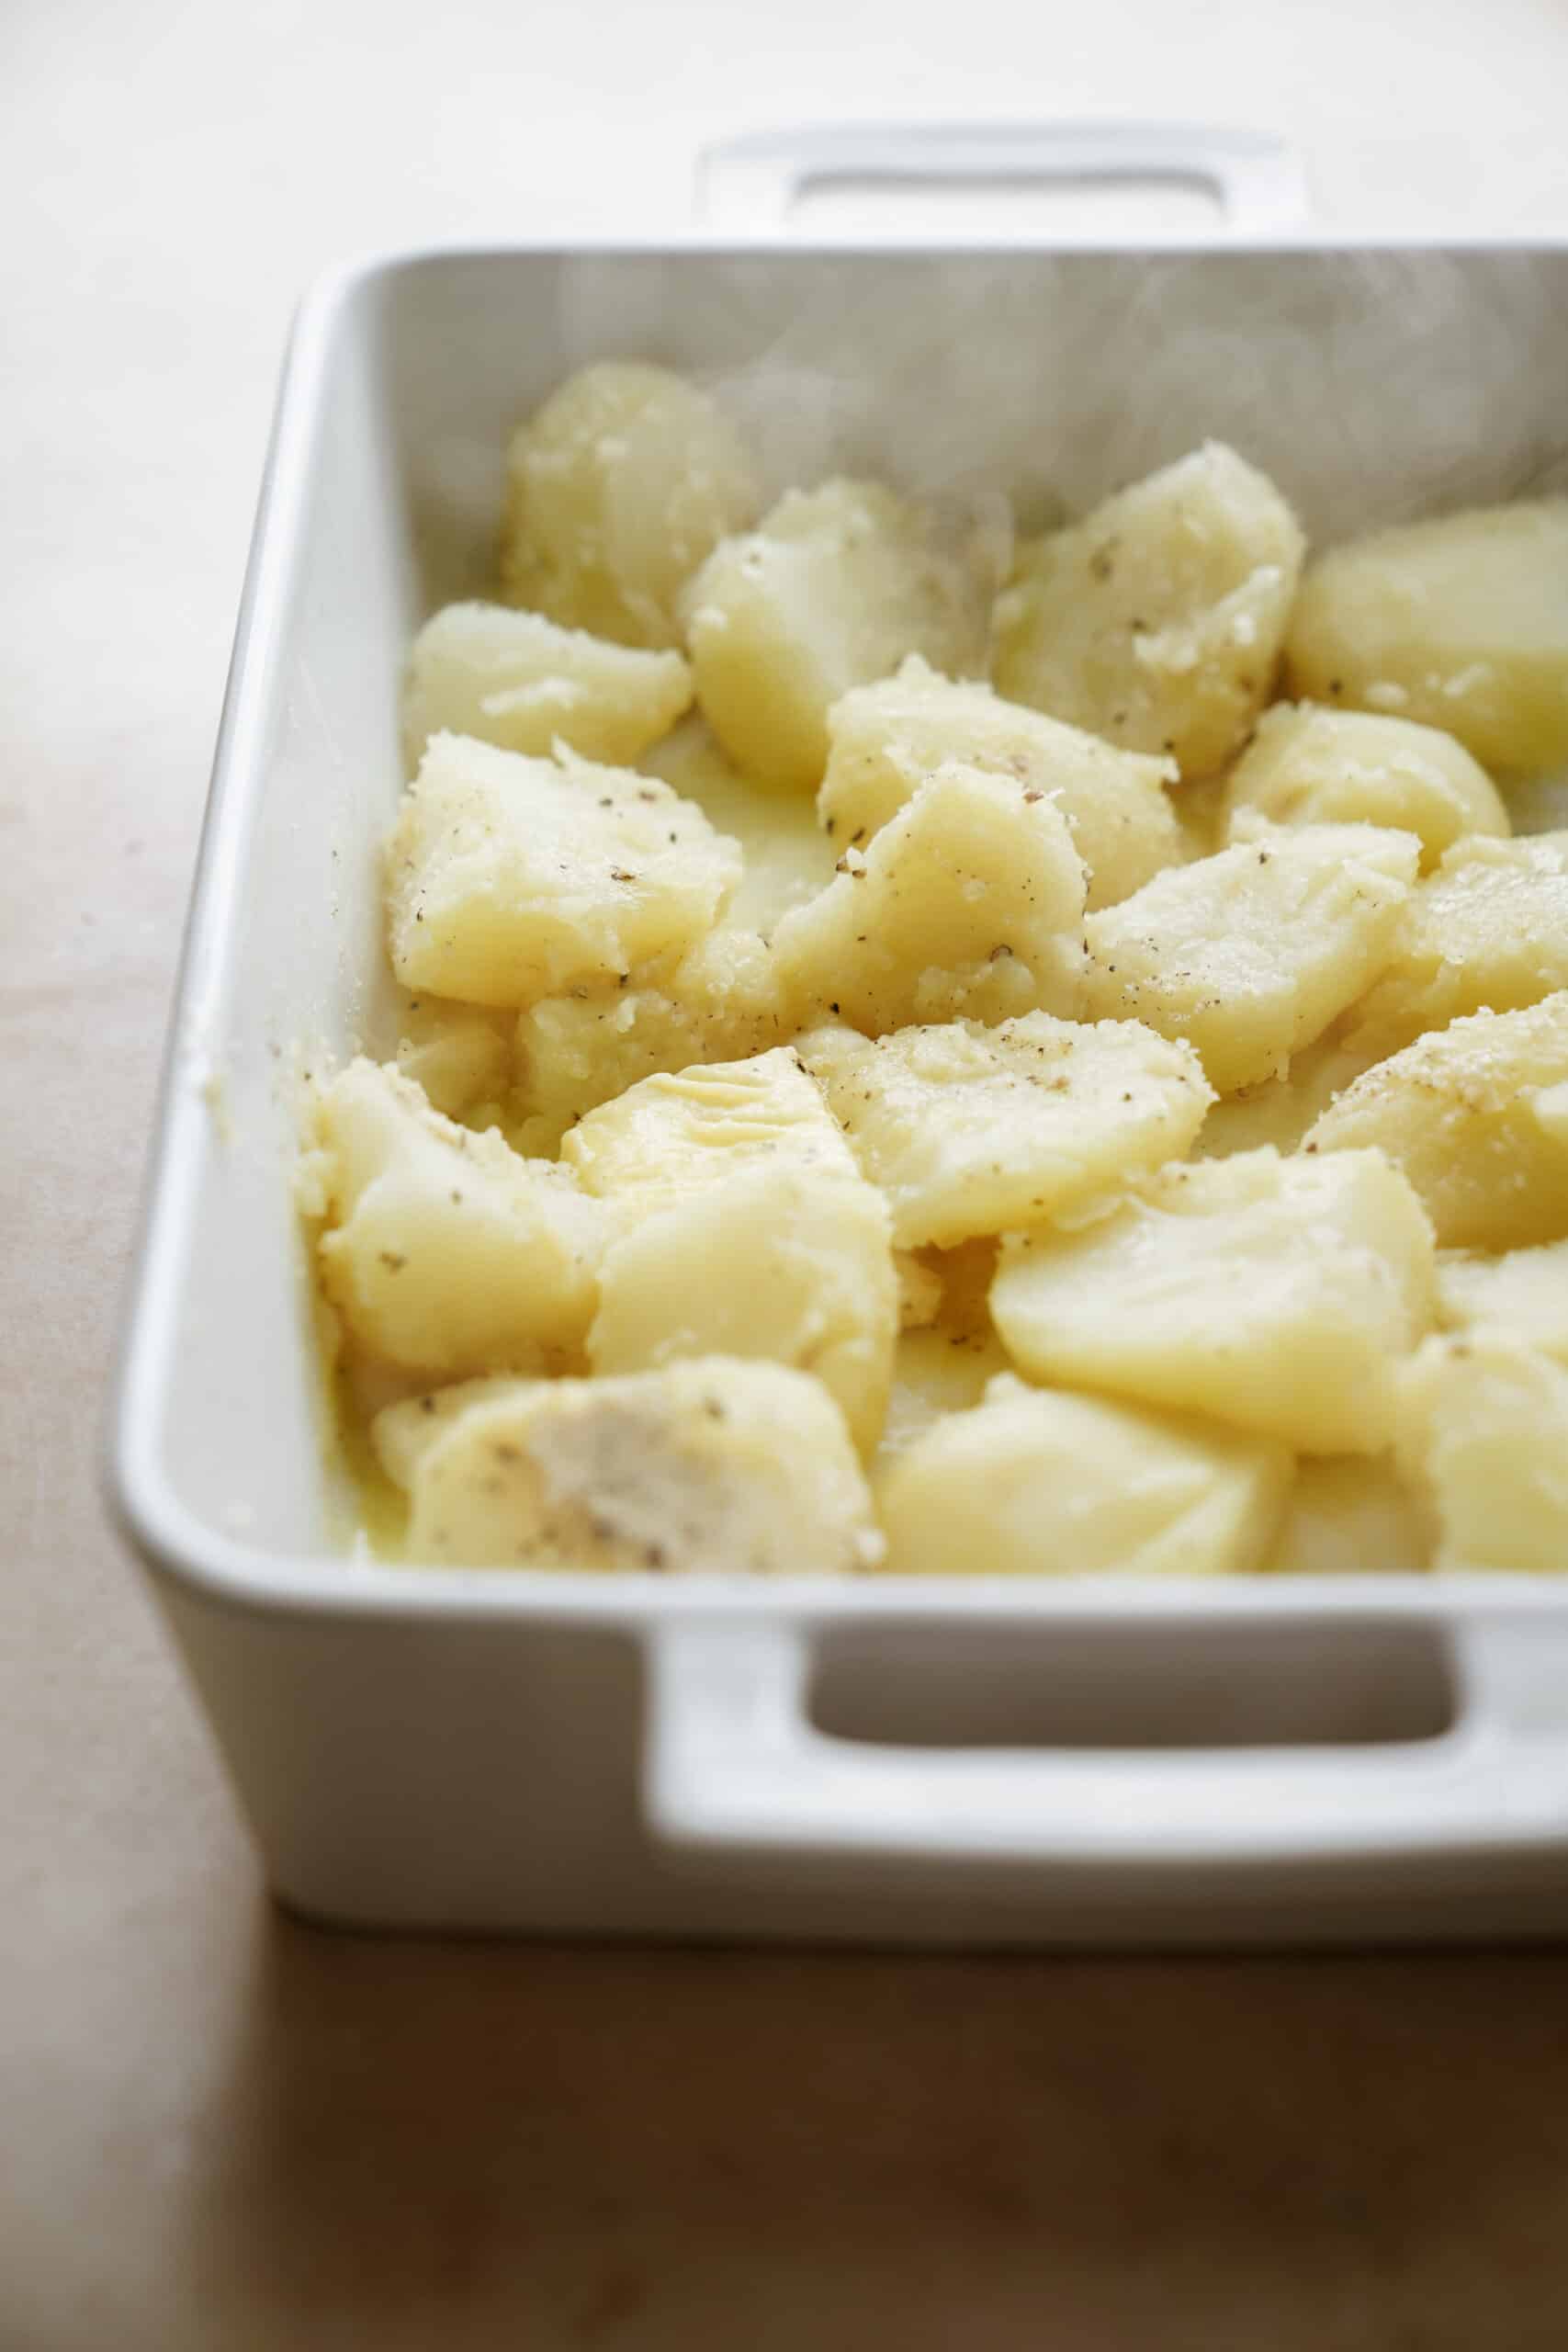 Cooked potatoes in a casserole dish